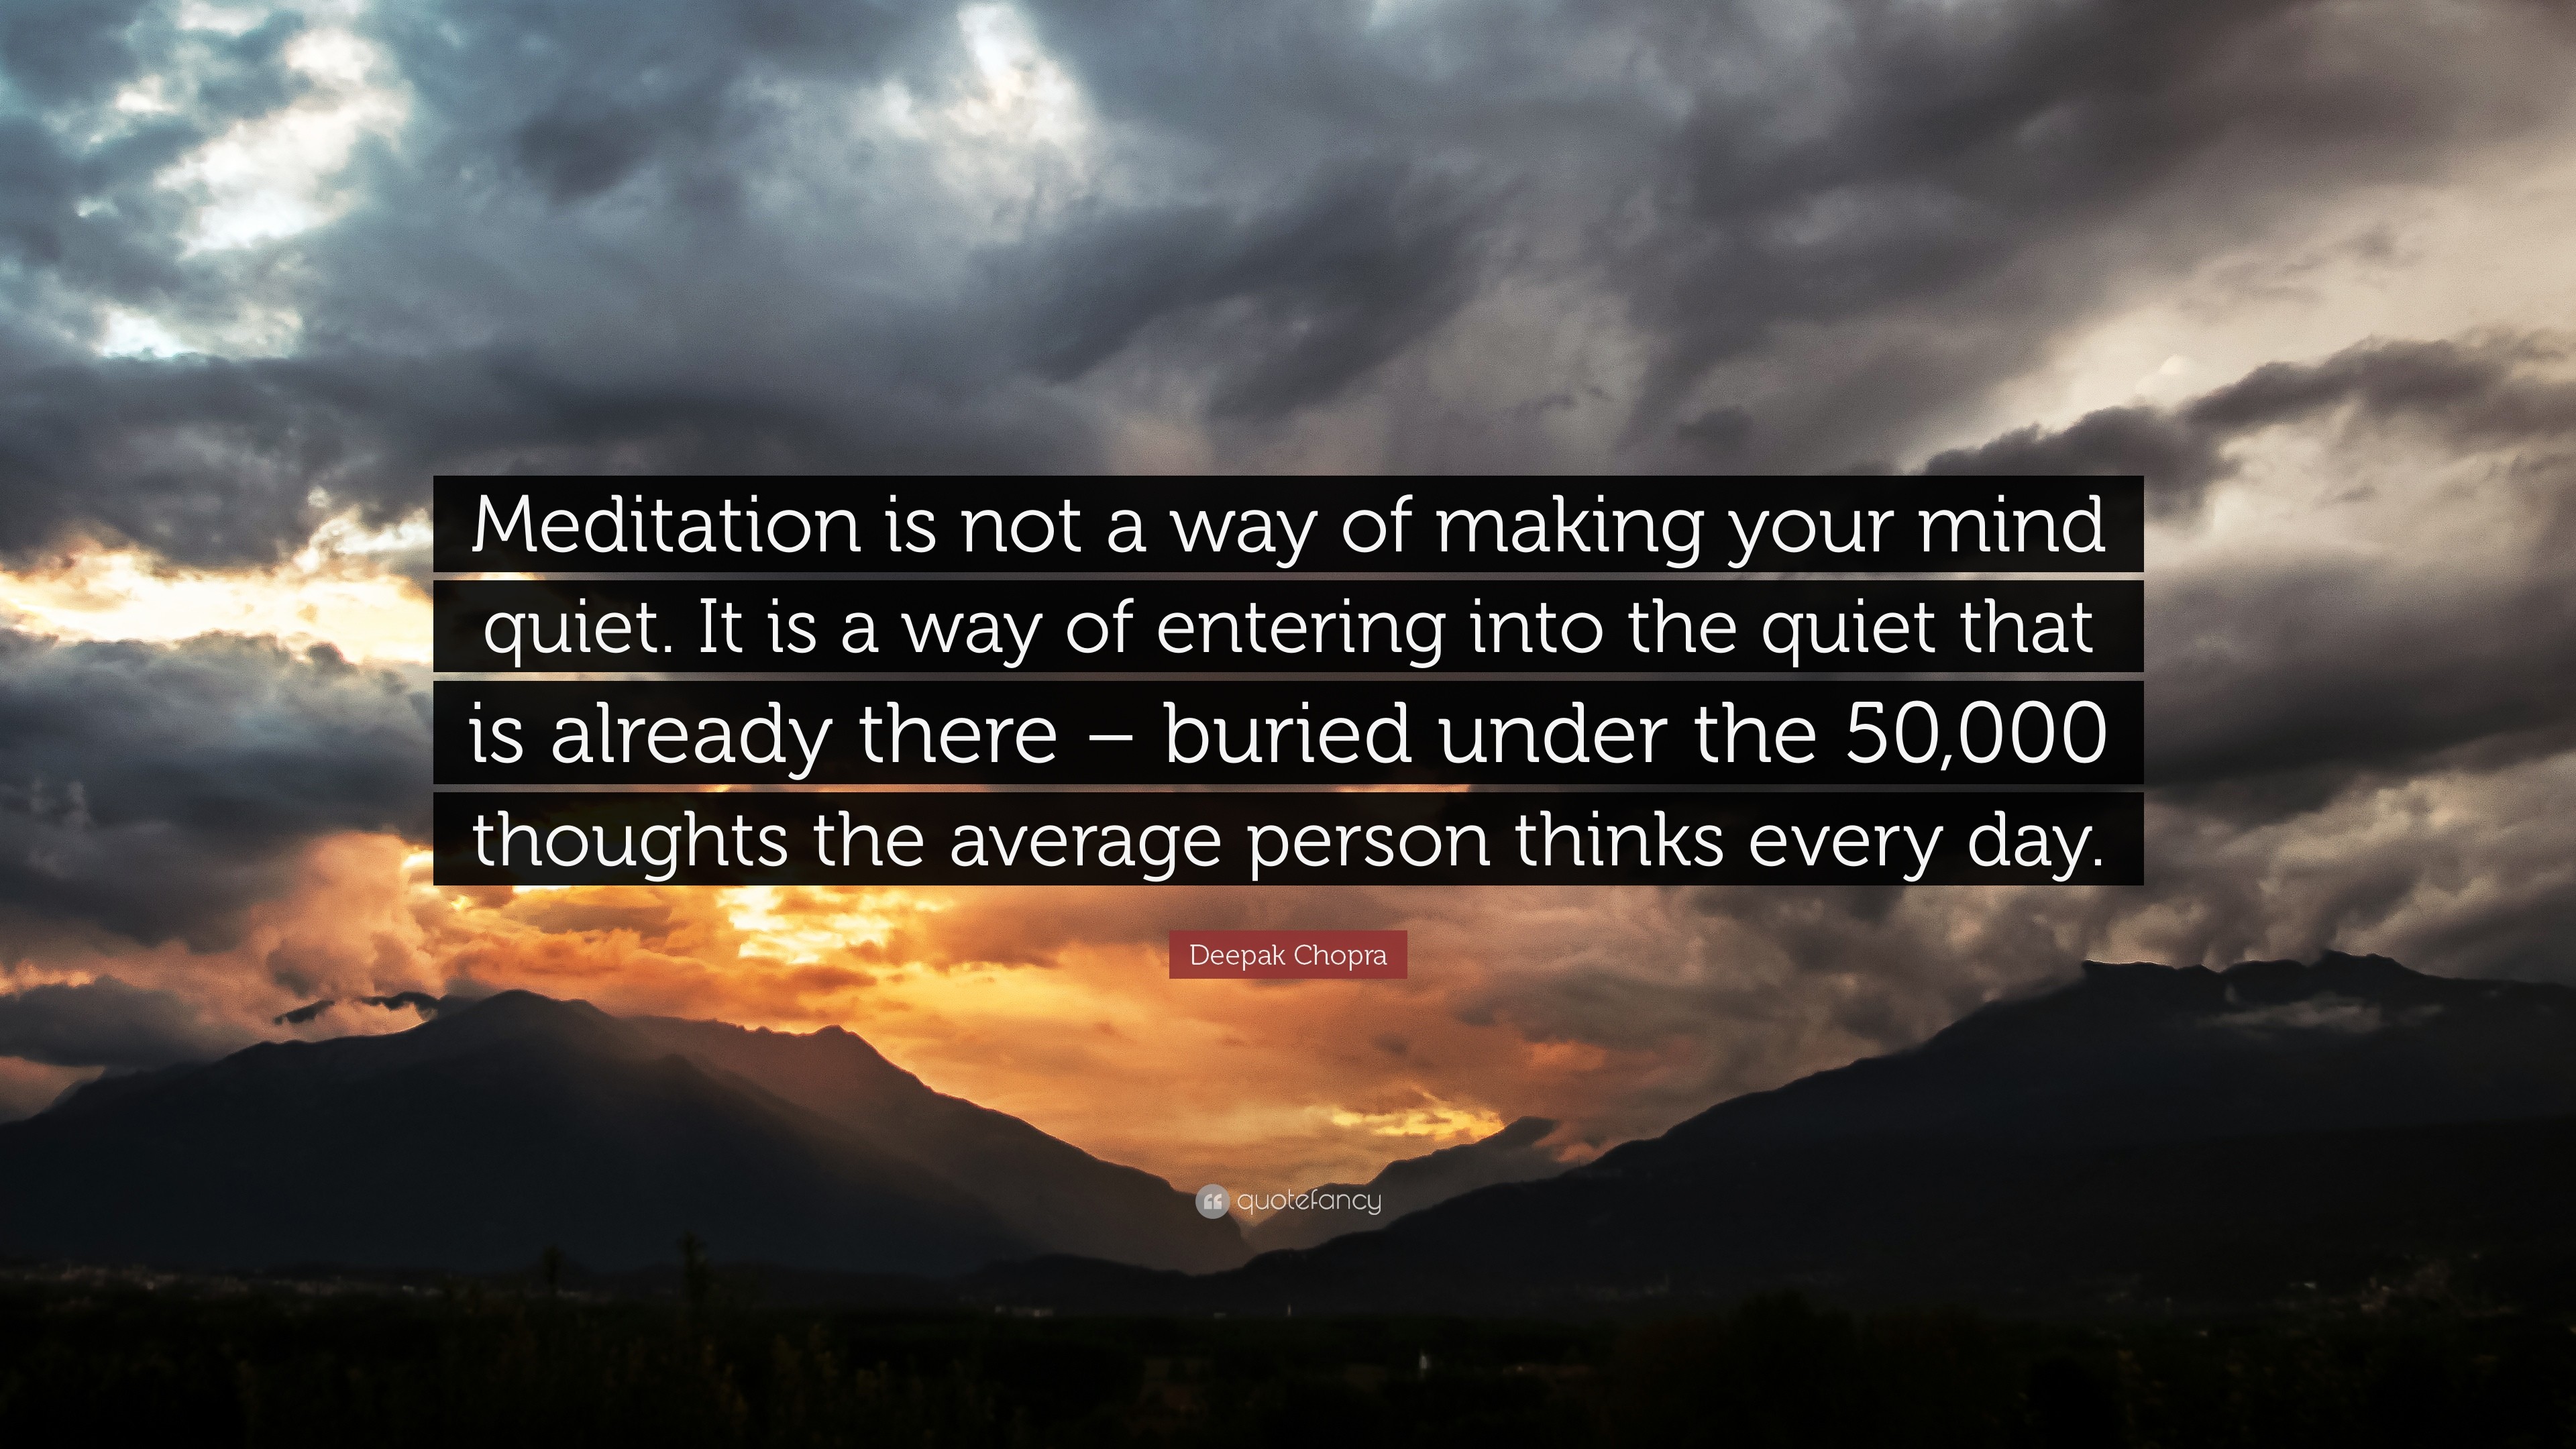 3840x2160 Spiritual Quotes: “Meditation is not a way of making your mind quiet. It